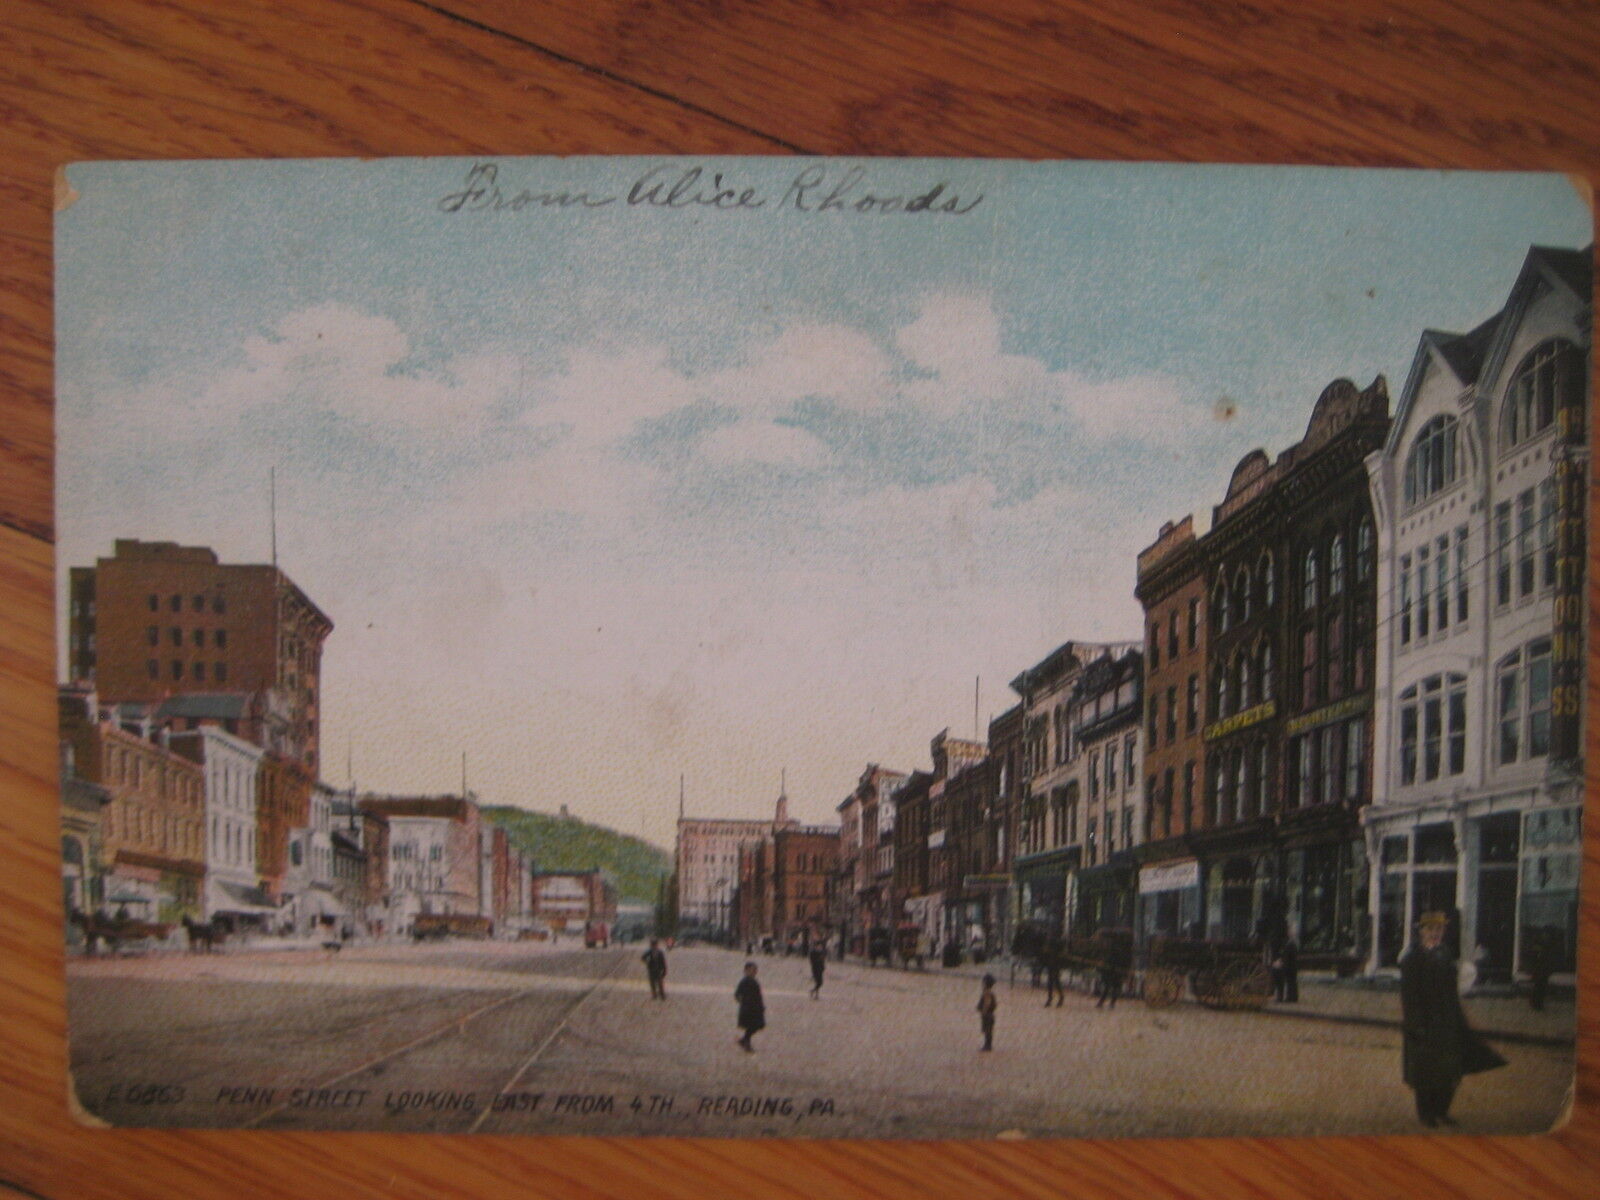 vintage Penn Street Looking East from 4th Reading PA POSTCARD antique photo card